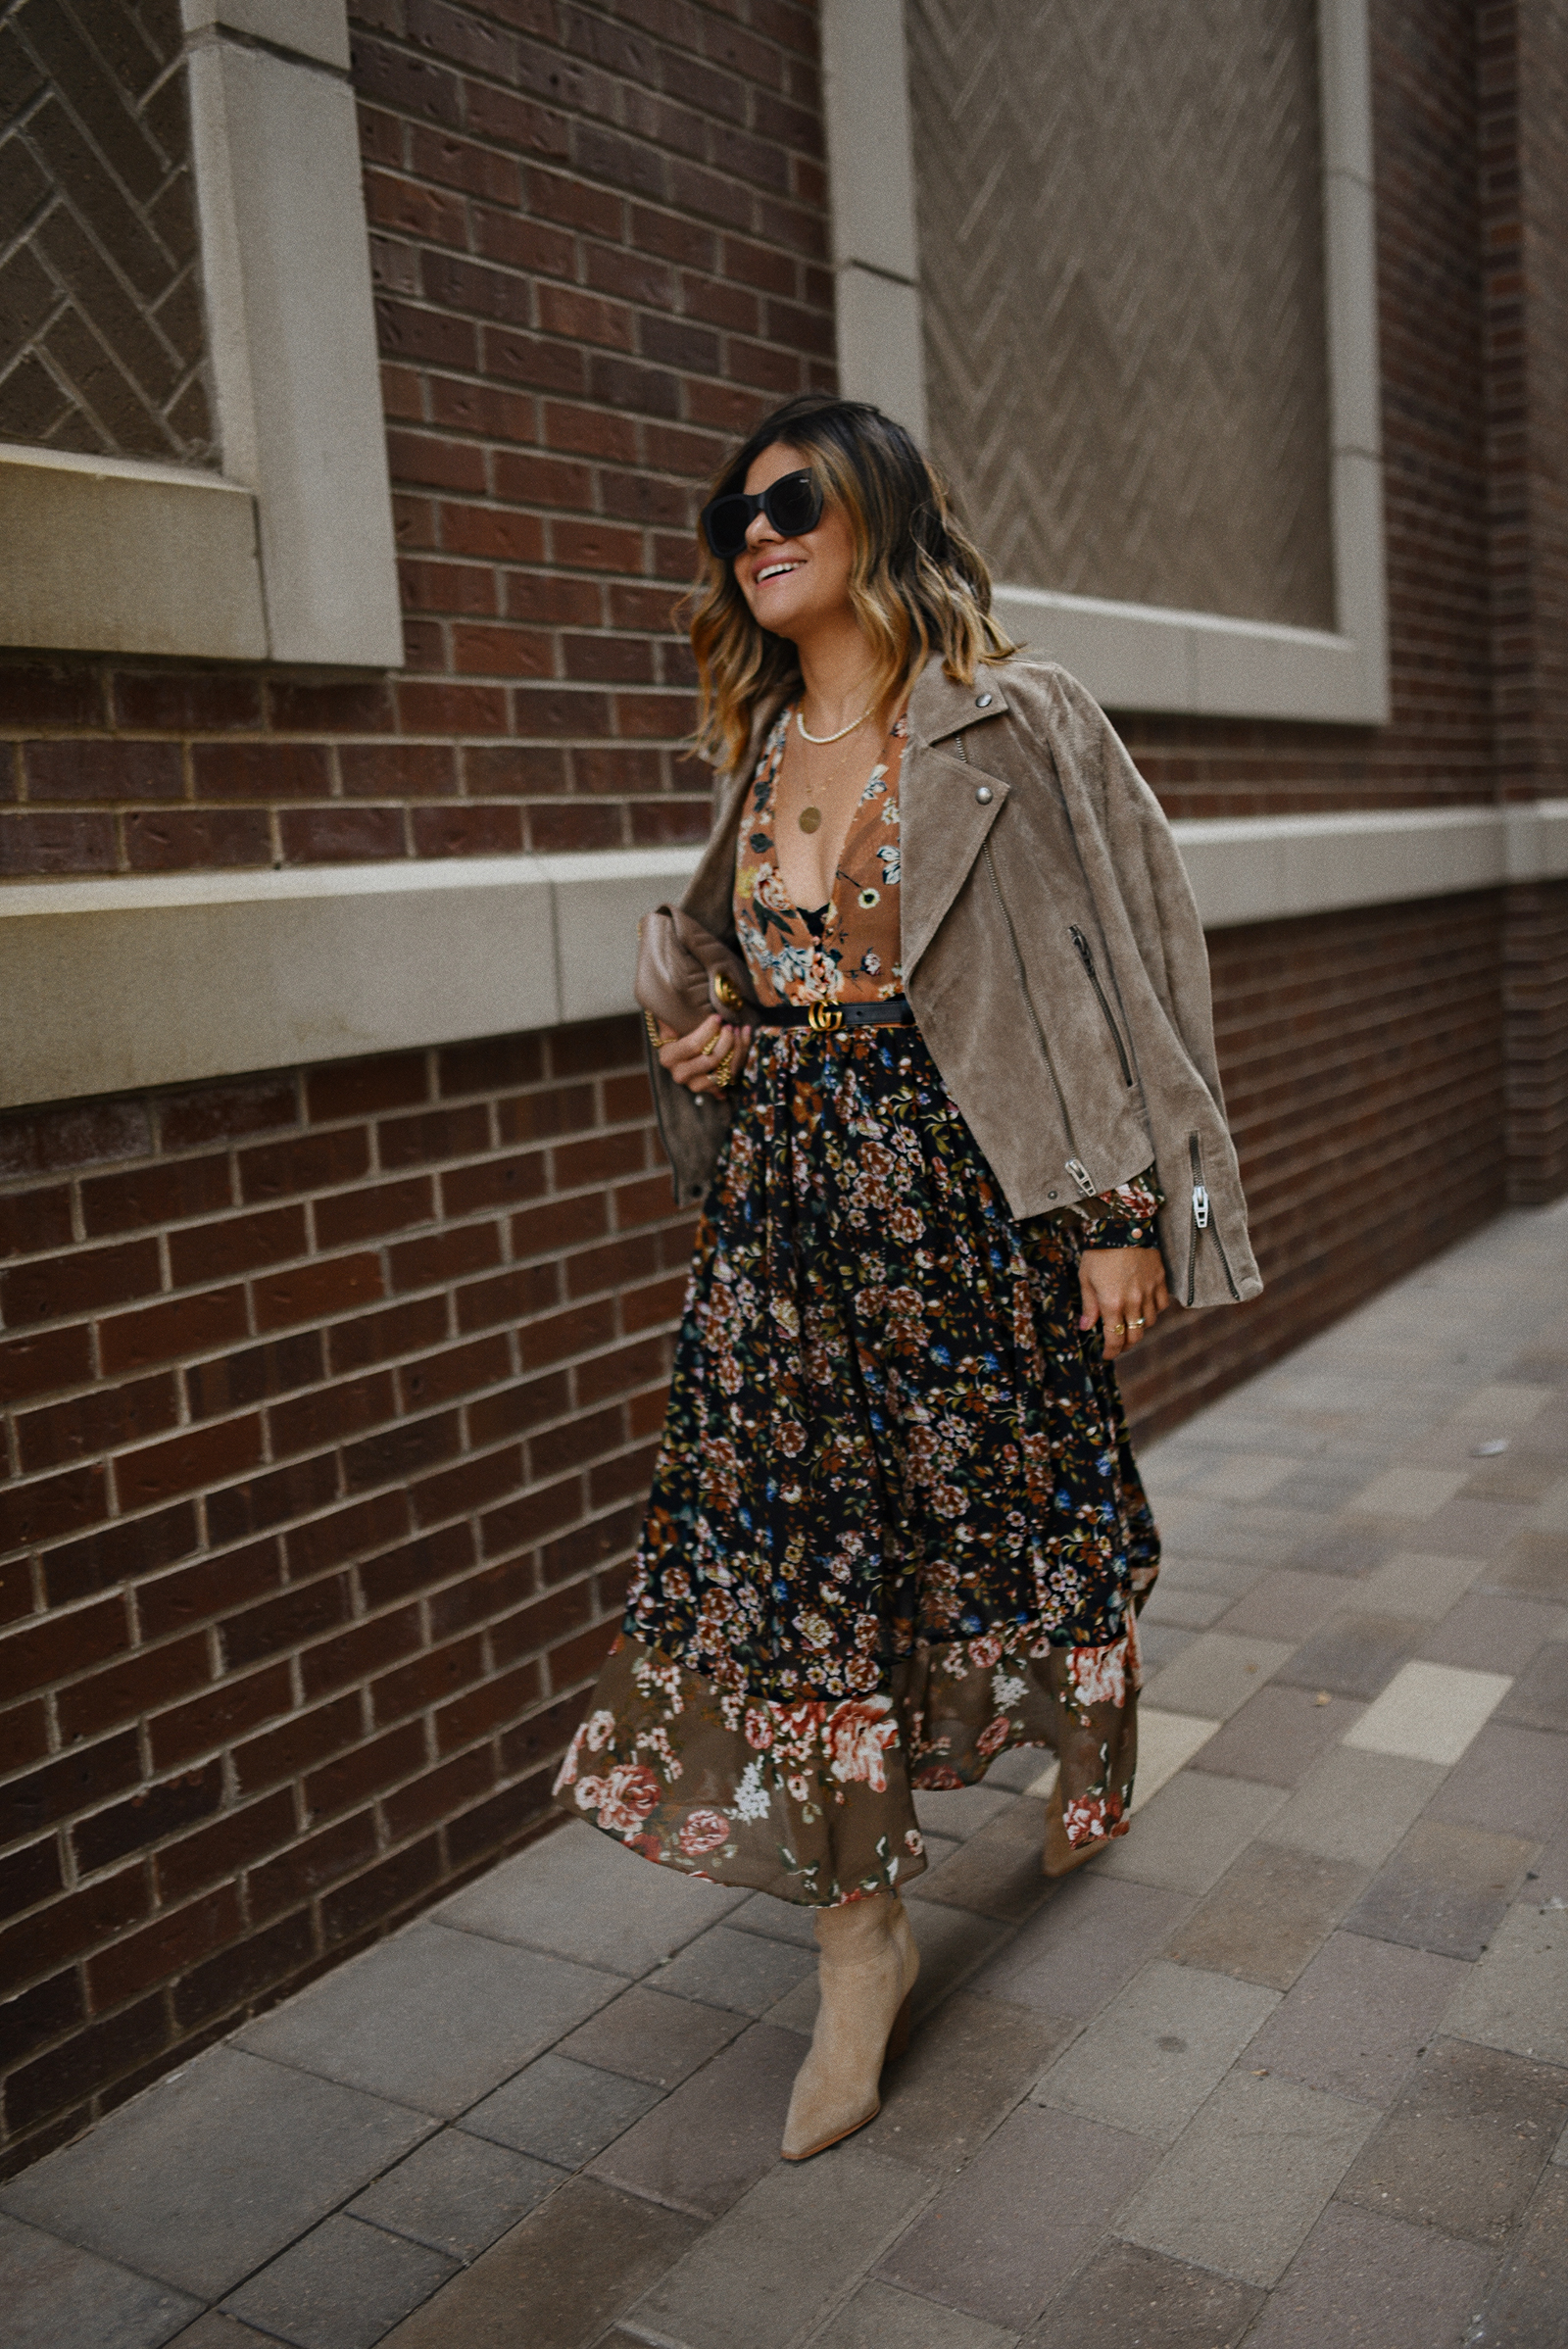 CAROLINA HELLAL FROM CHIC TALK WEARING A FALL FLORAL DRESS AND SUEDE JACKET AND BOOTS